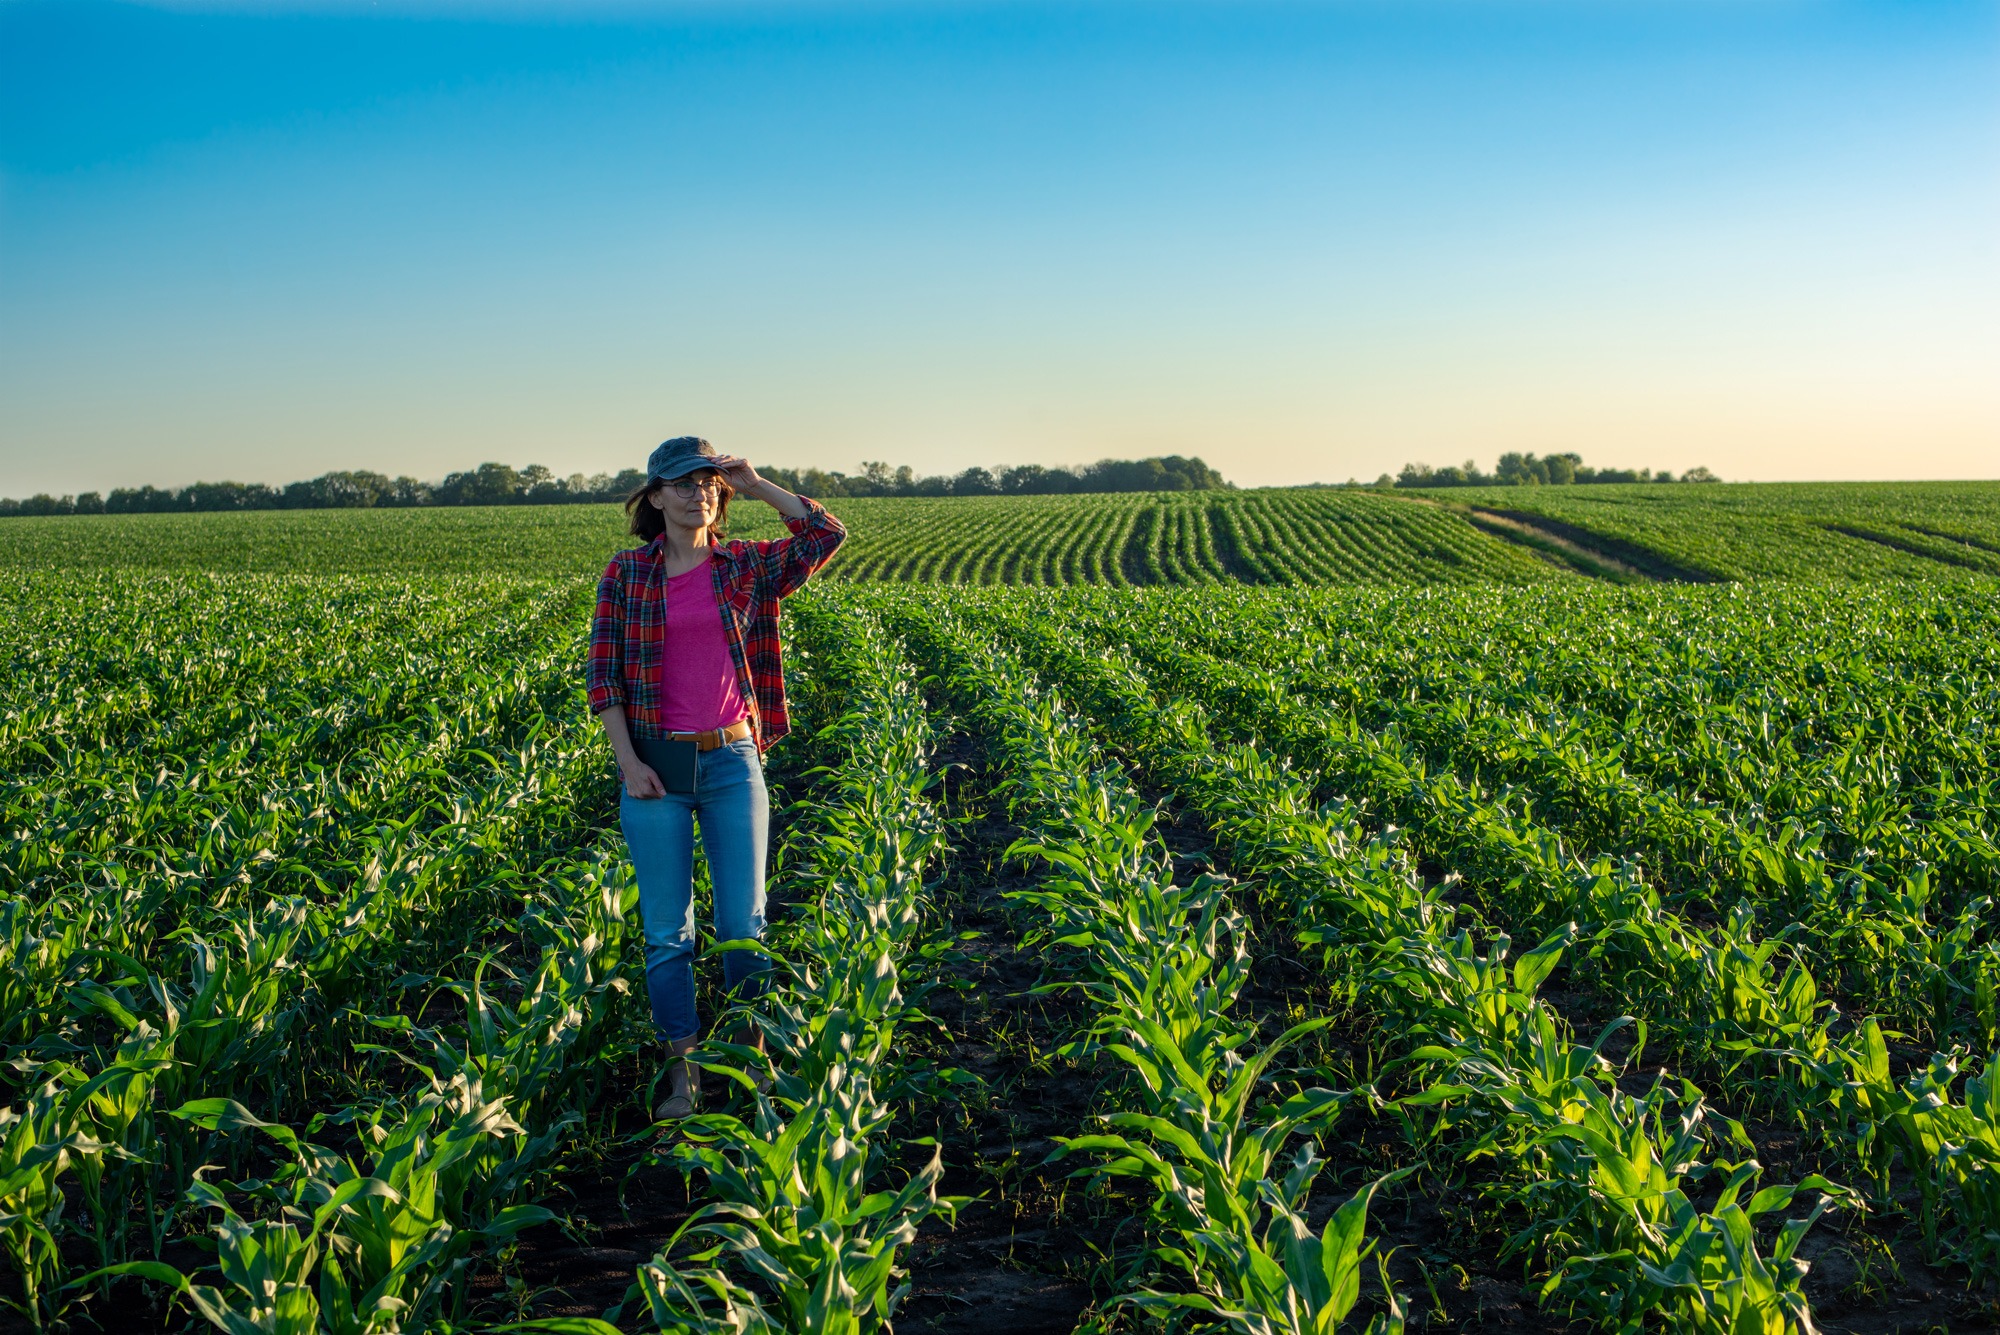 female farmer in a hat holding a tablet standing in a midwest cornfield, looking after the farm after her husband's farm accident